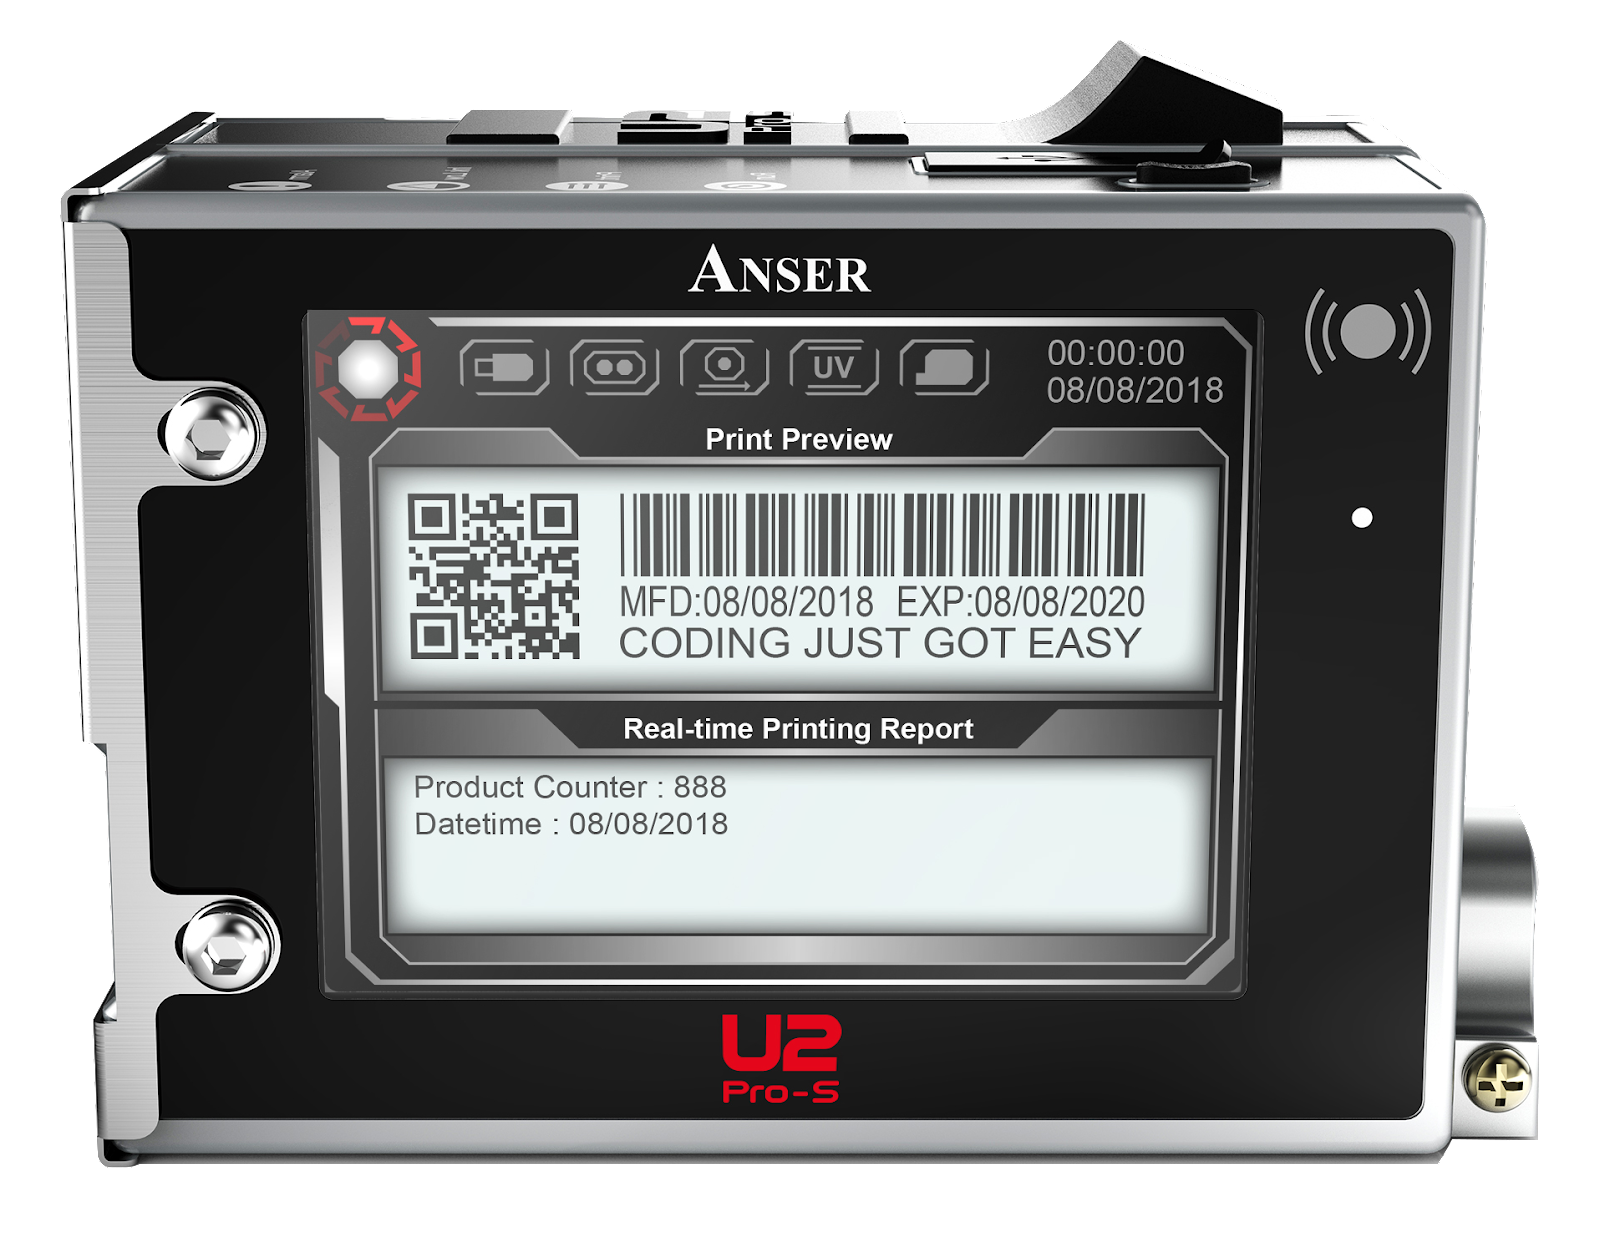 Anser Pro-S TIJ coding and marking system.